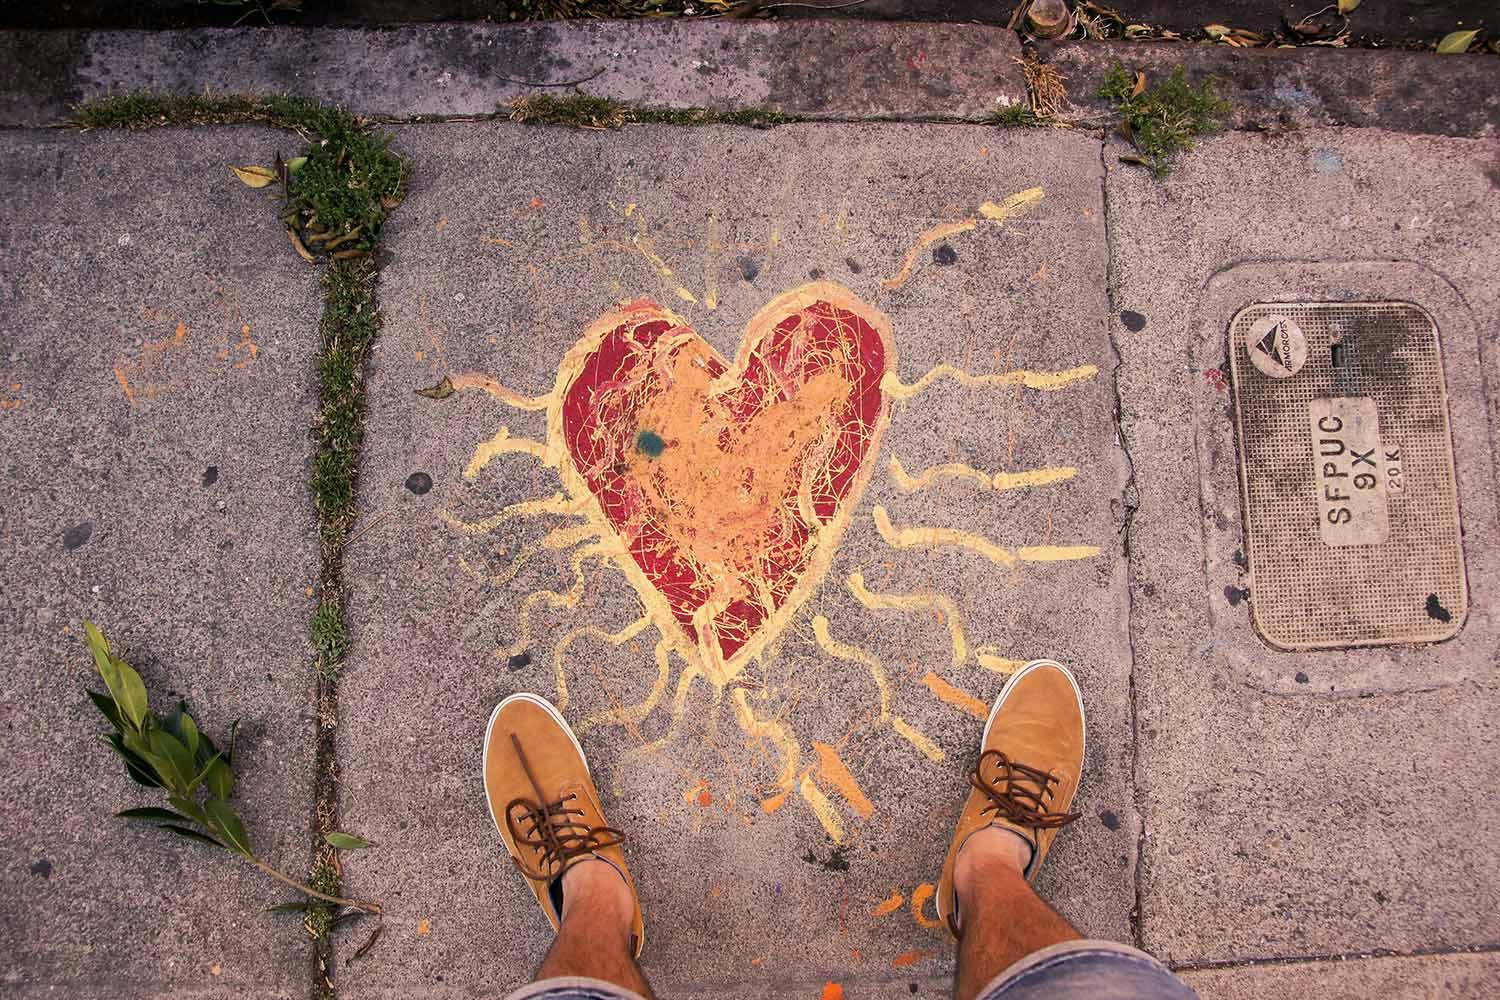 A person wearing brown shoes stands at a red heart with yellow lines radiating from it drawn on a concrete sidewalk.